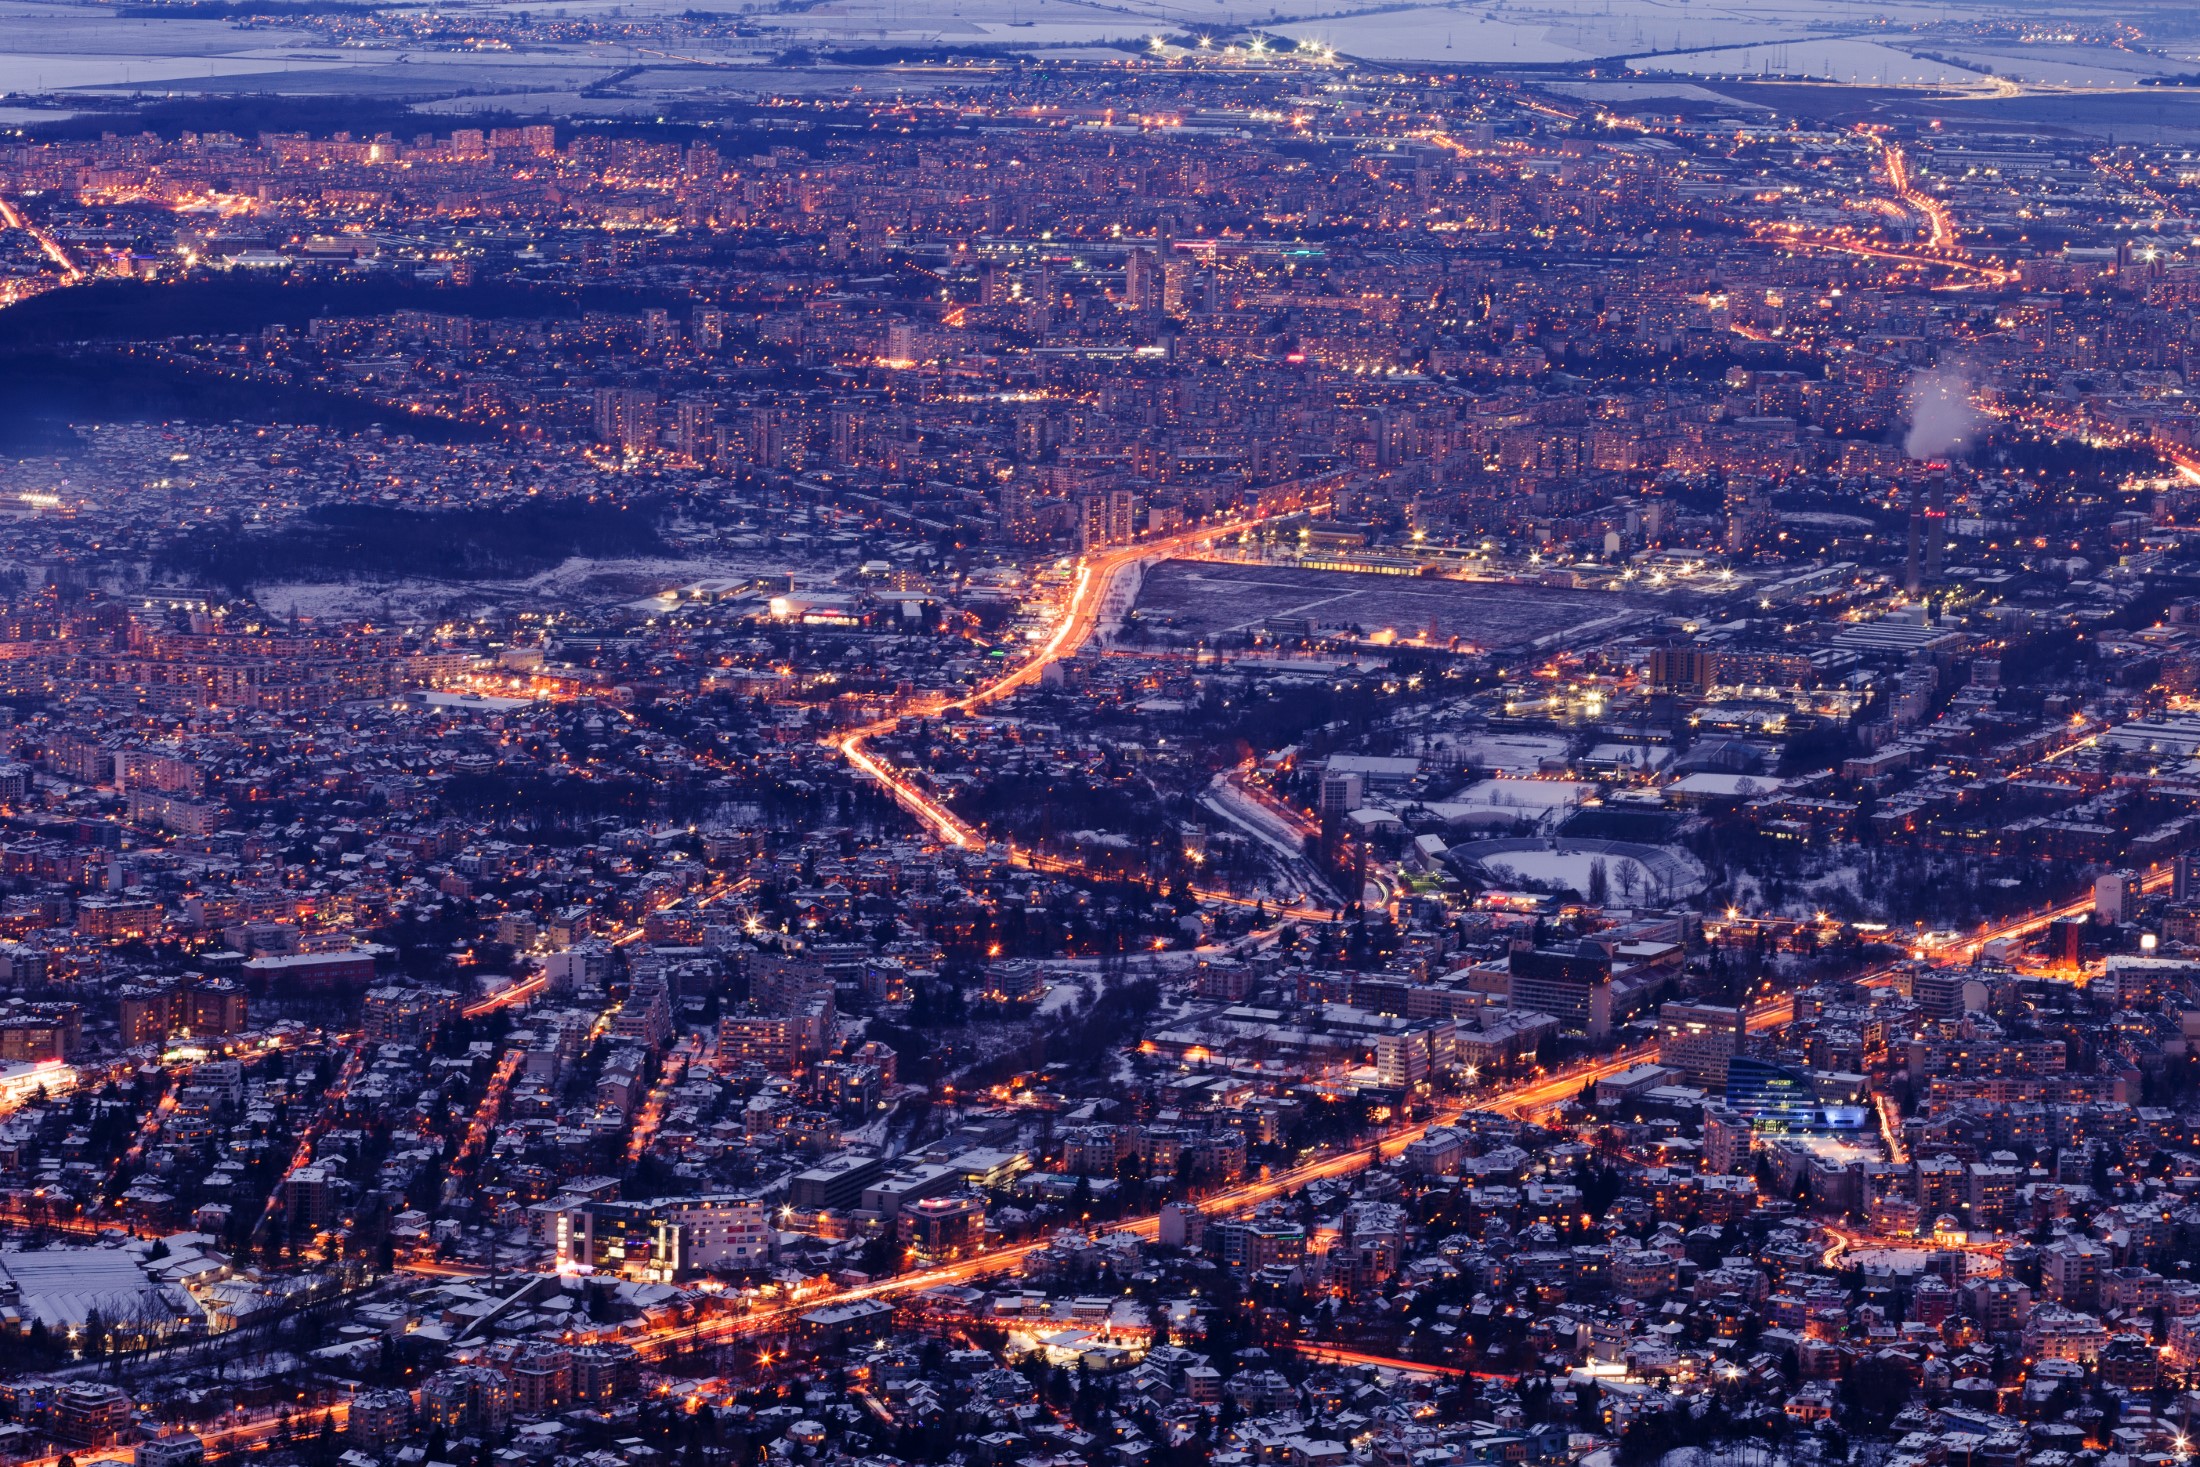 Image of Sofia city from high at dusk, Bulgaria.